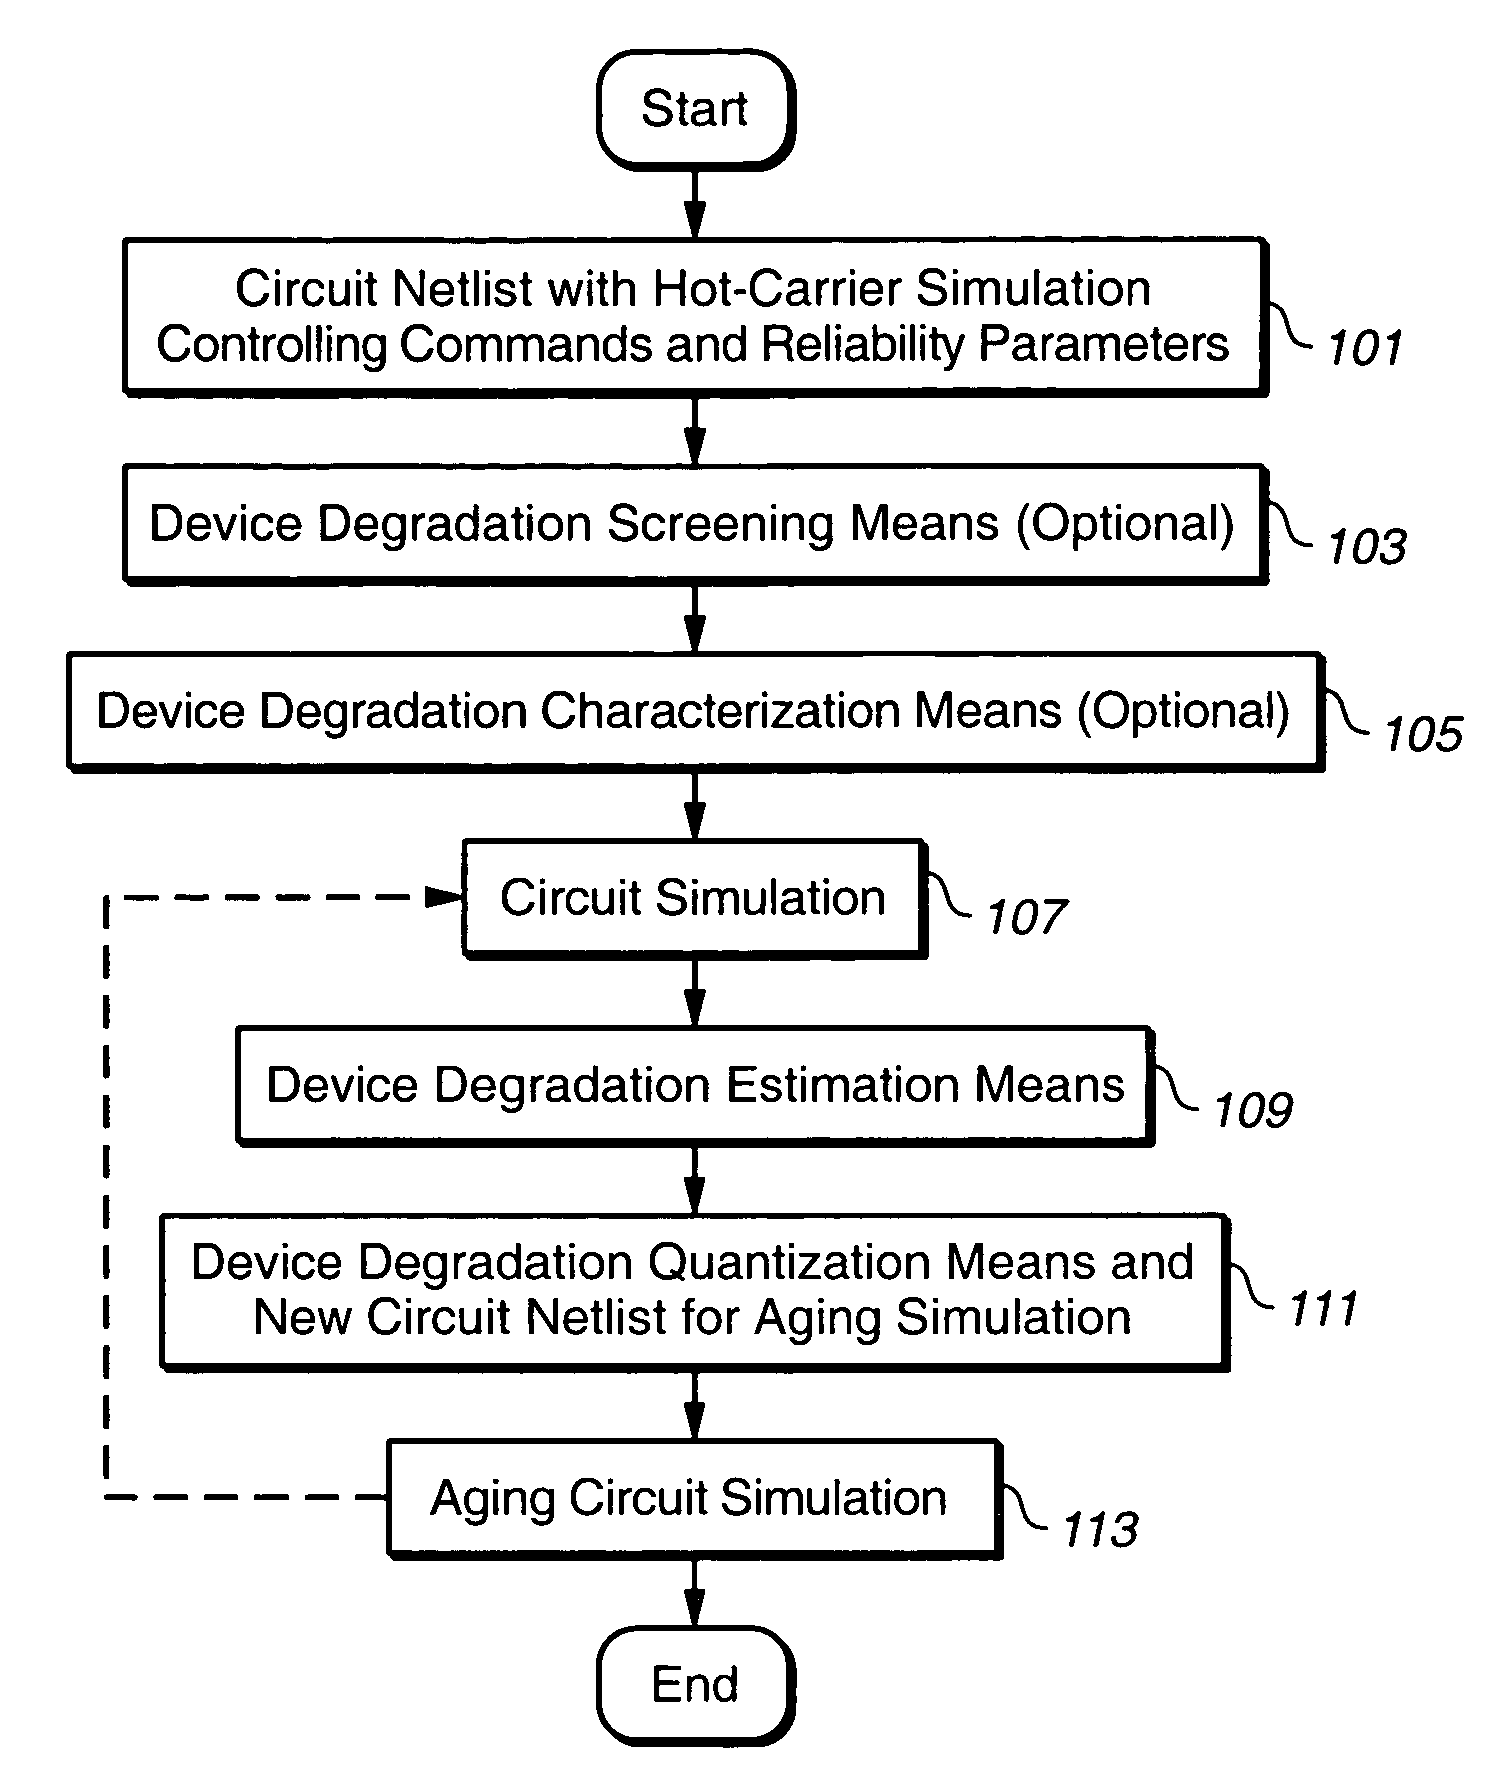 Hot-carrier device degradation modeling and extraction methodologies